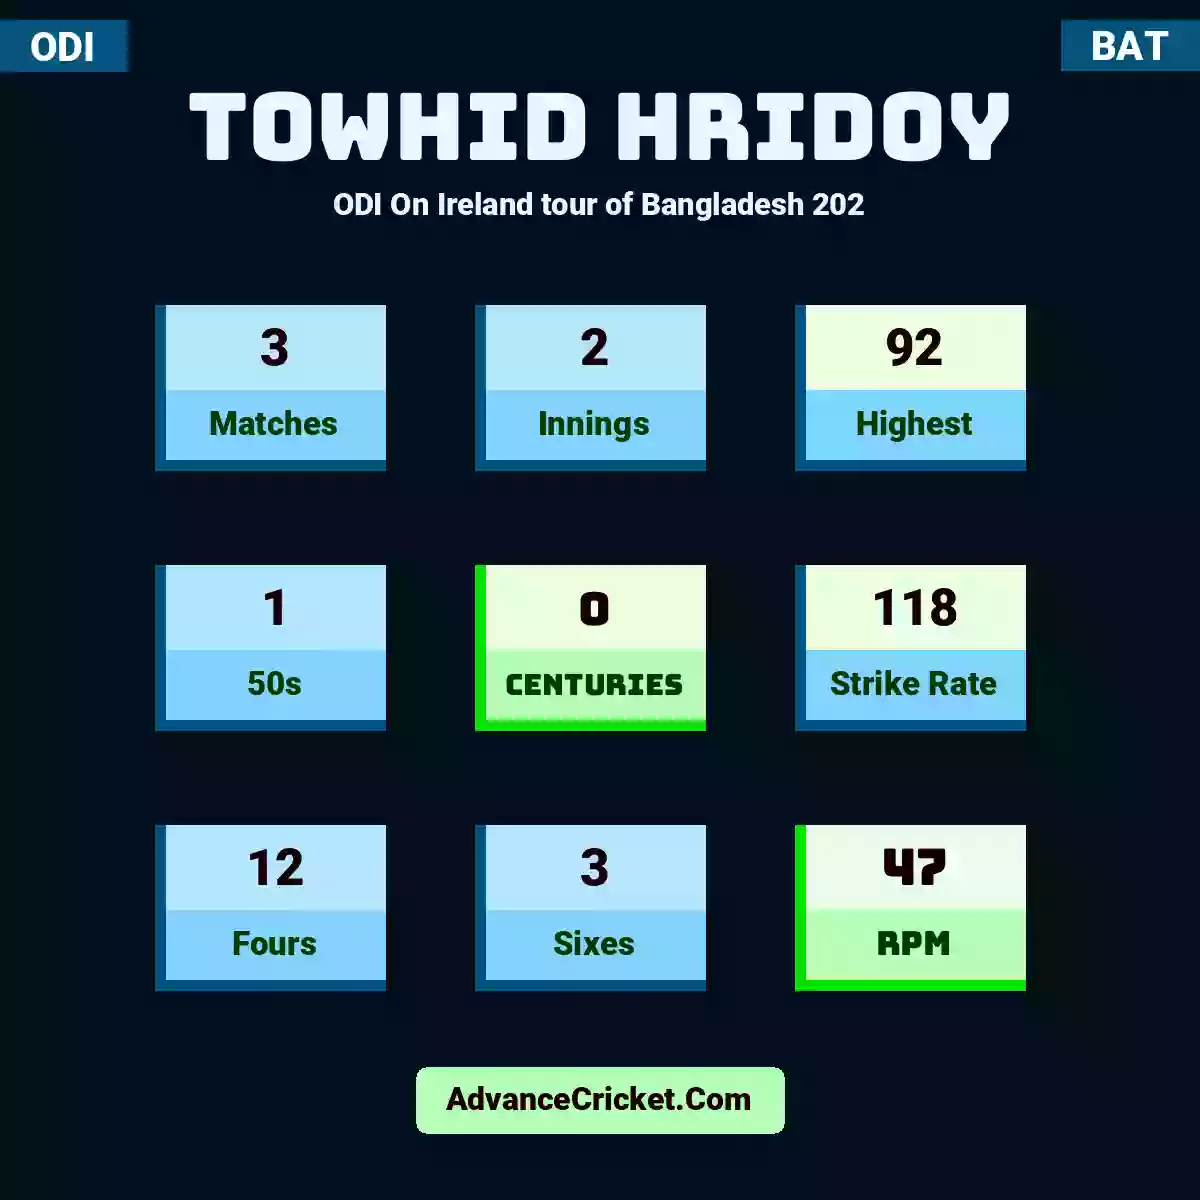 Towhid Hridoy ODI  On Ireland tour of Bangladesh 202, Towhid Hridoy played 3 matches, scored 92 runs as highest, 1 half-centuries, and 0 centuries, with a strike rate of 118. T.Hridoy hit 12 fours and 3 sixes, with an RPM of 47.